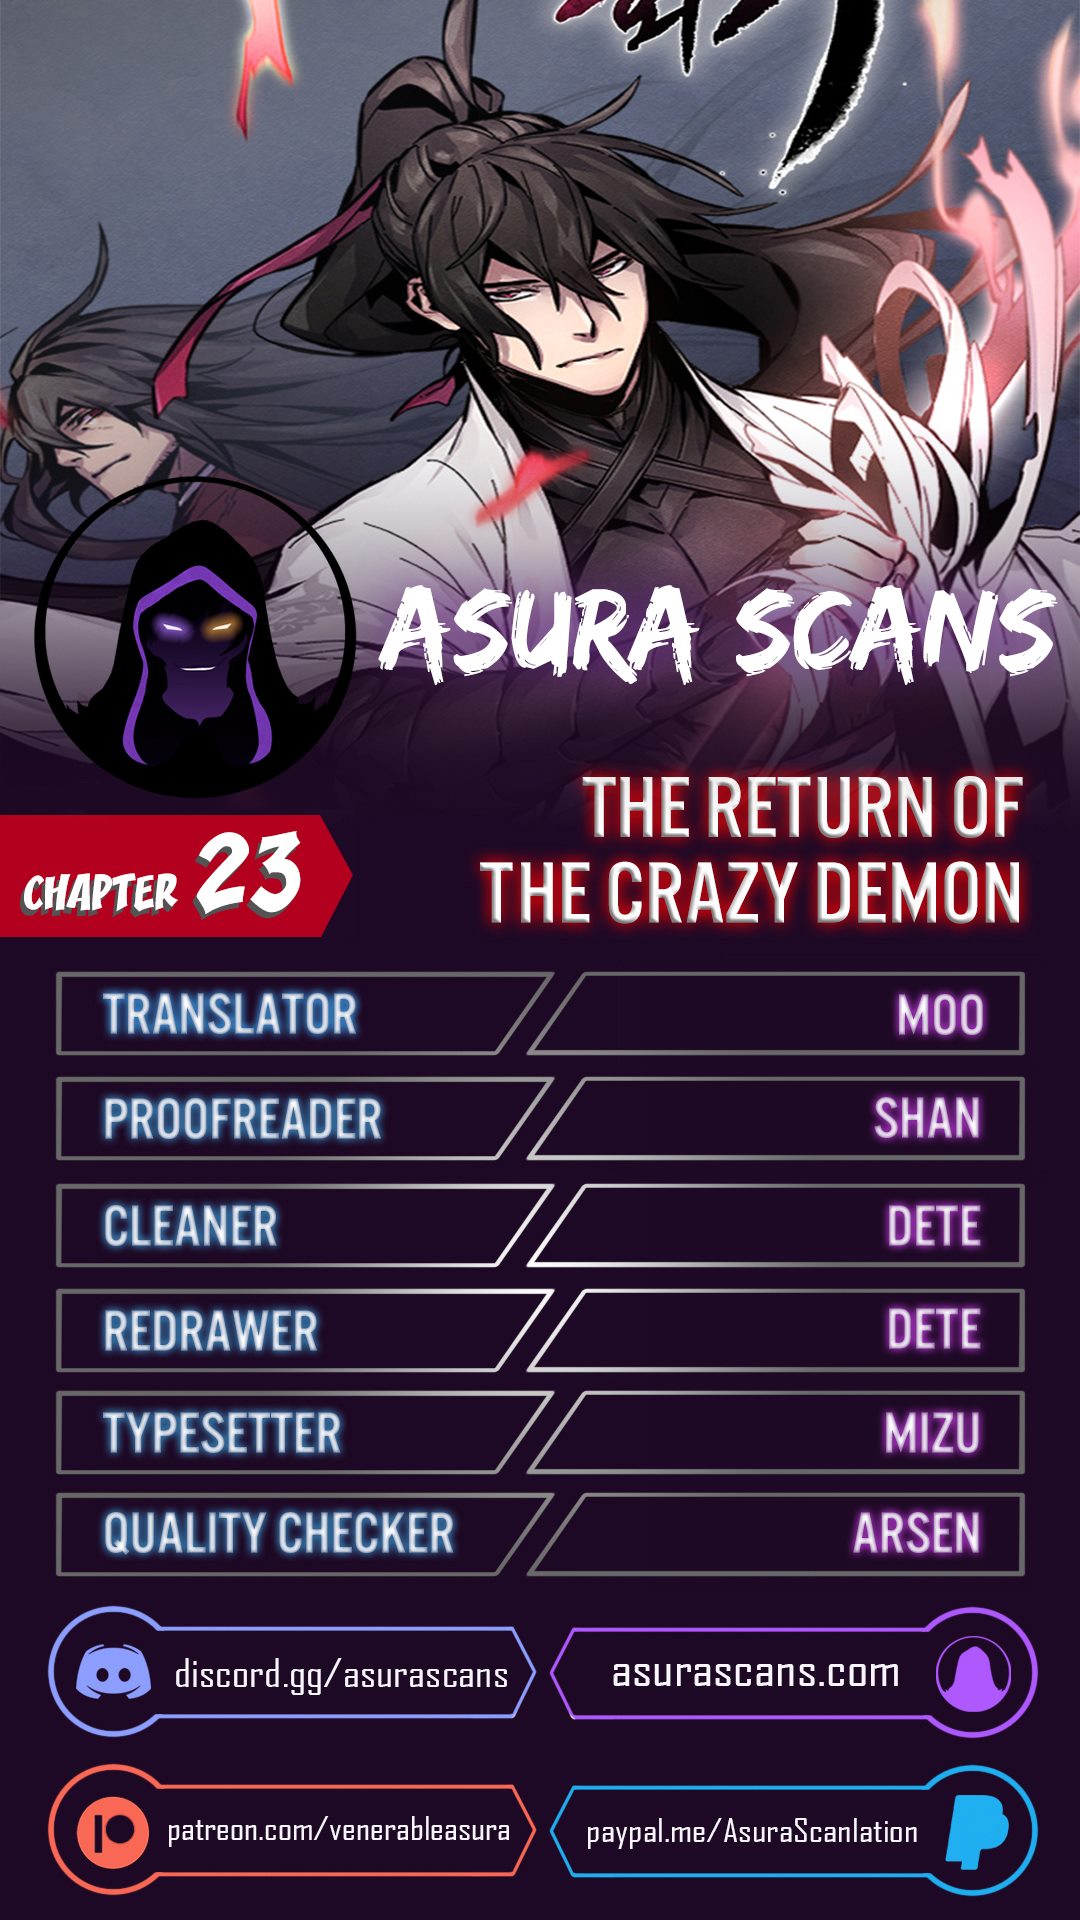 The Return of the Crazy Demon - Chapter 18564 - Image 1